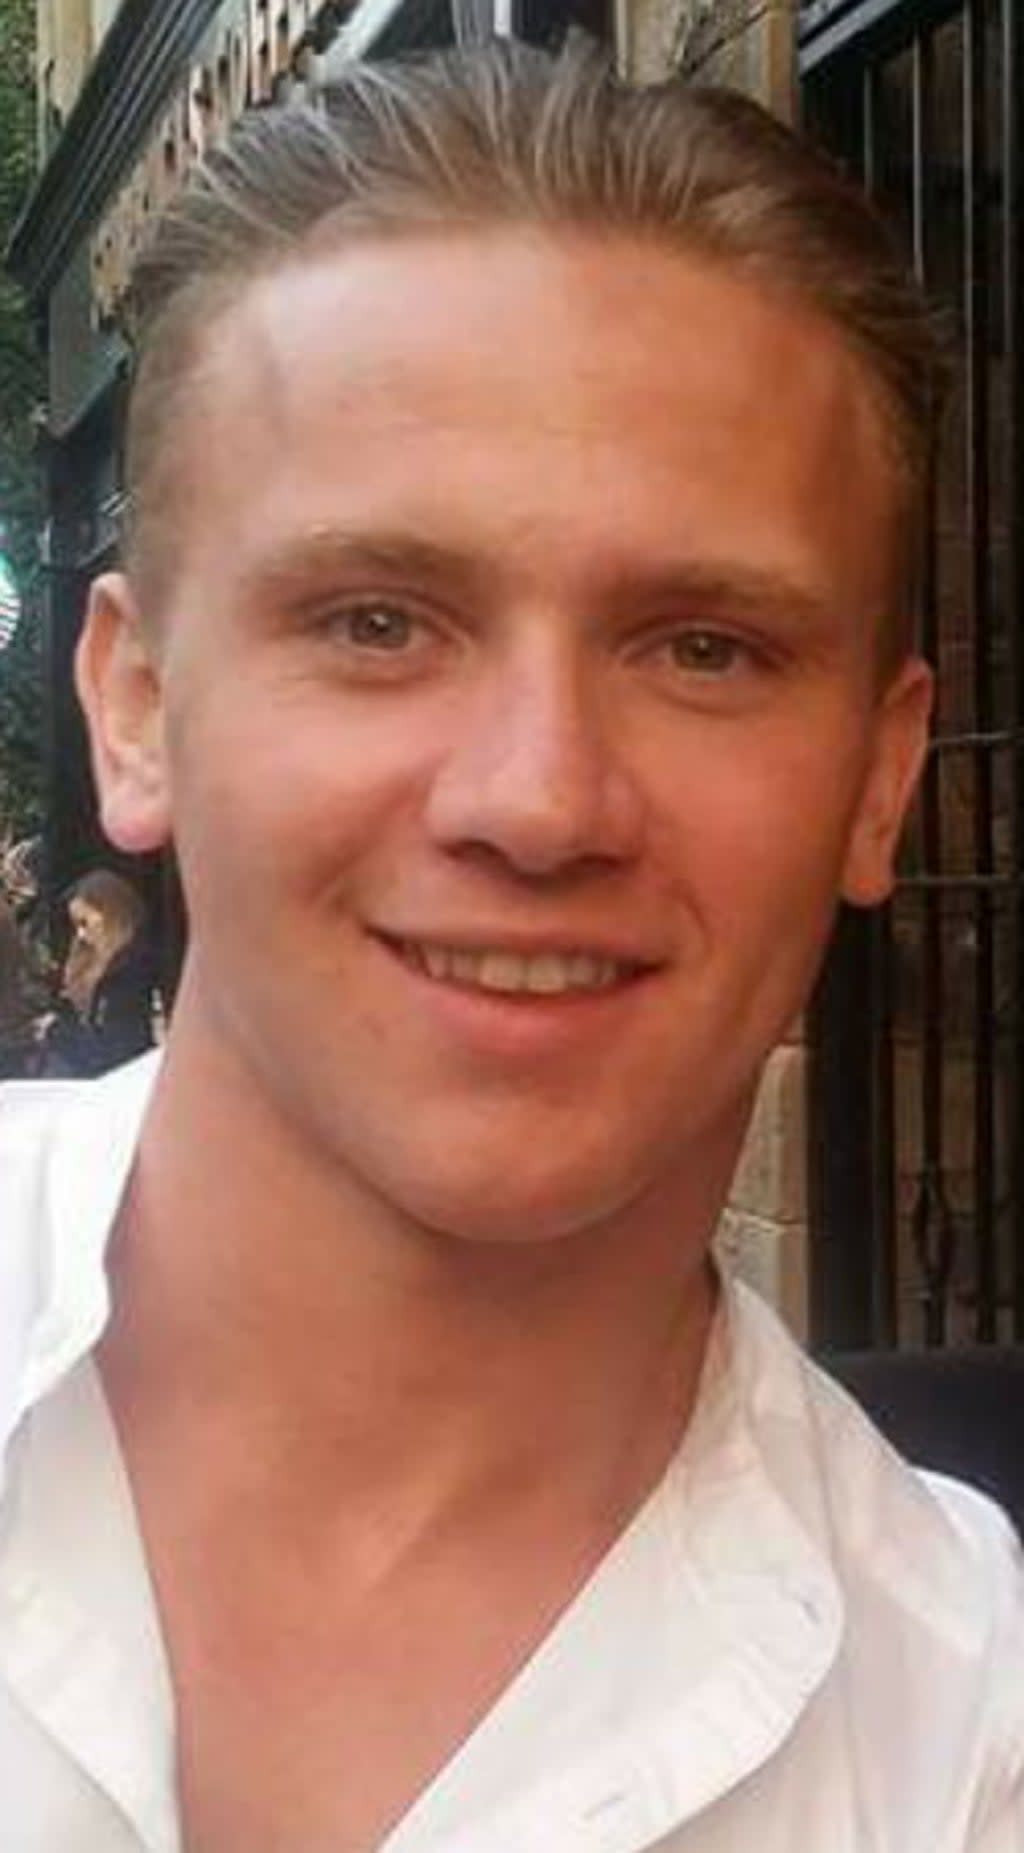 An inquest is taking place into the death of Corrie McKeague (Suffolk Police/PA) (PA Media)